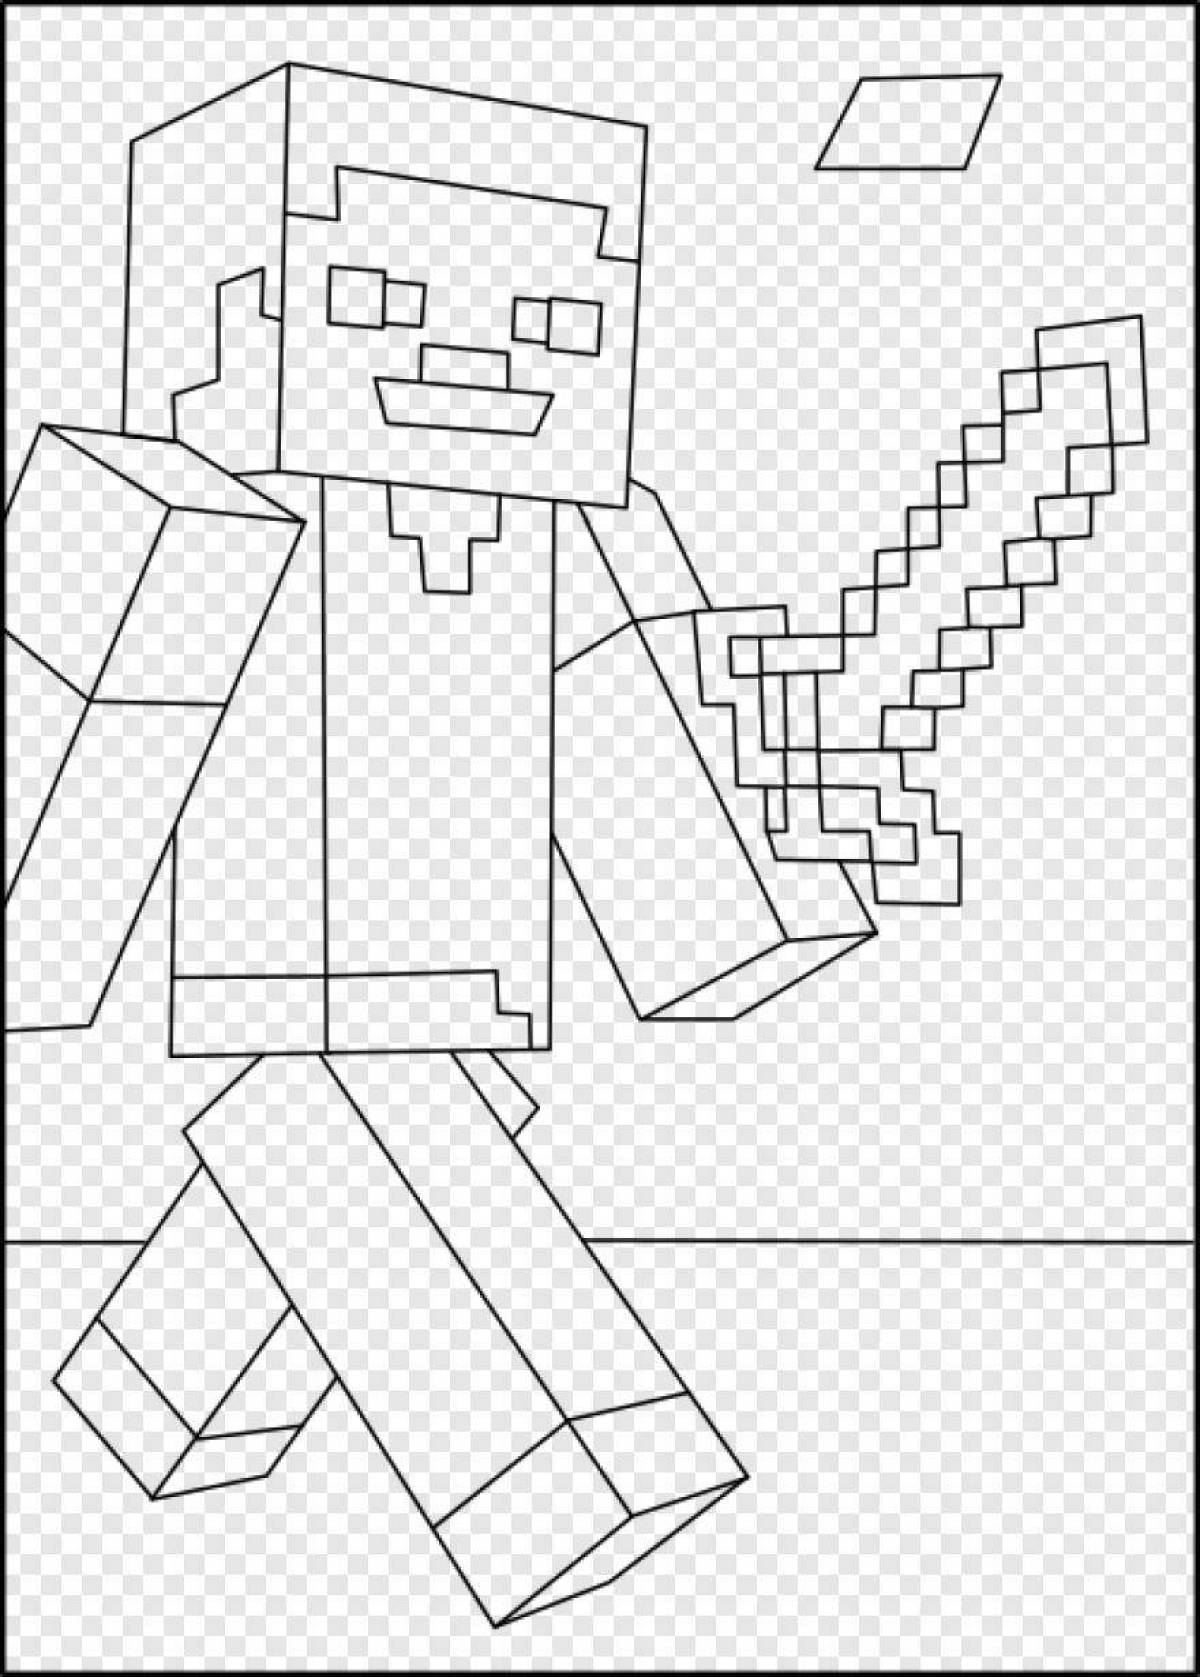 Playful minecraft pixel coloring page